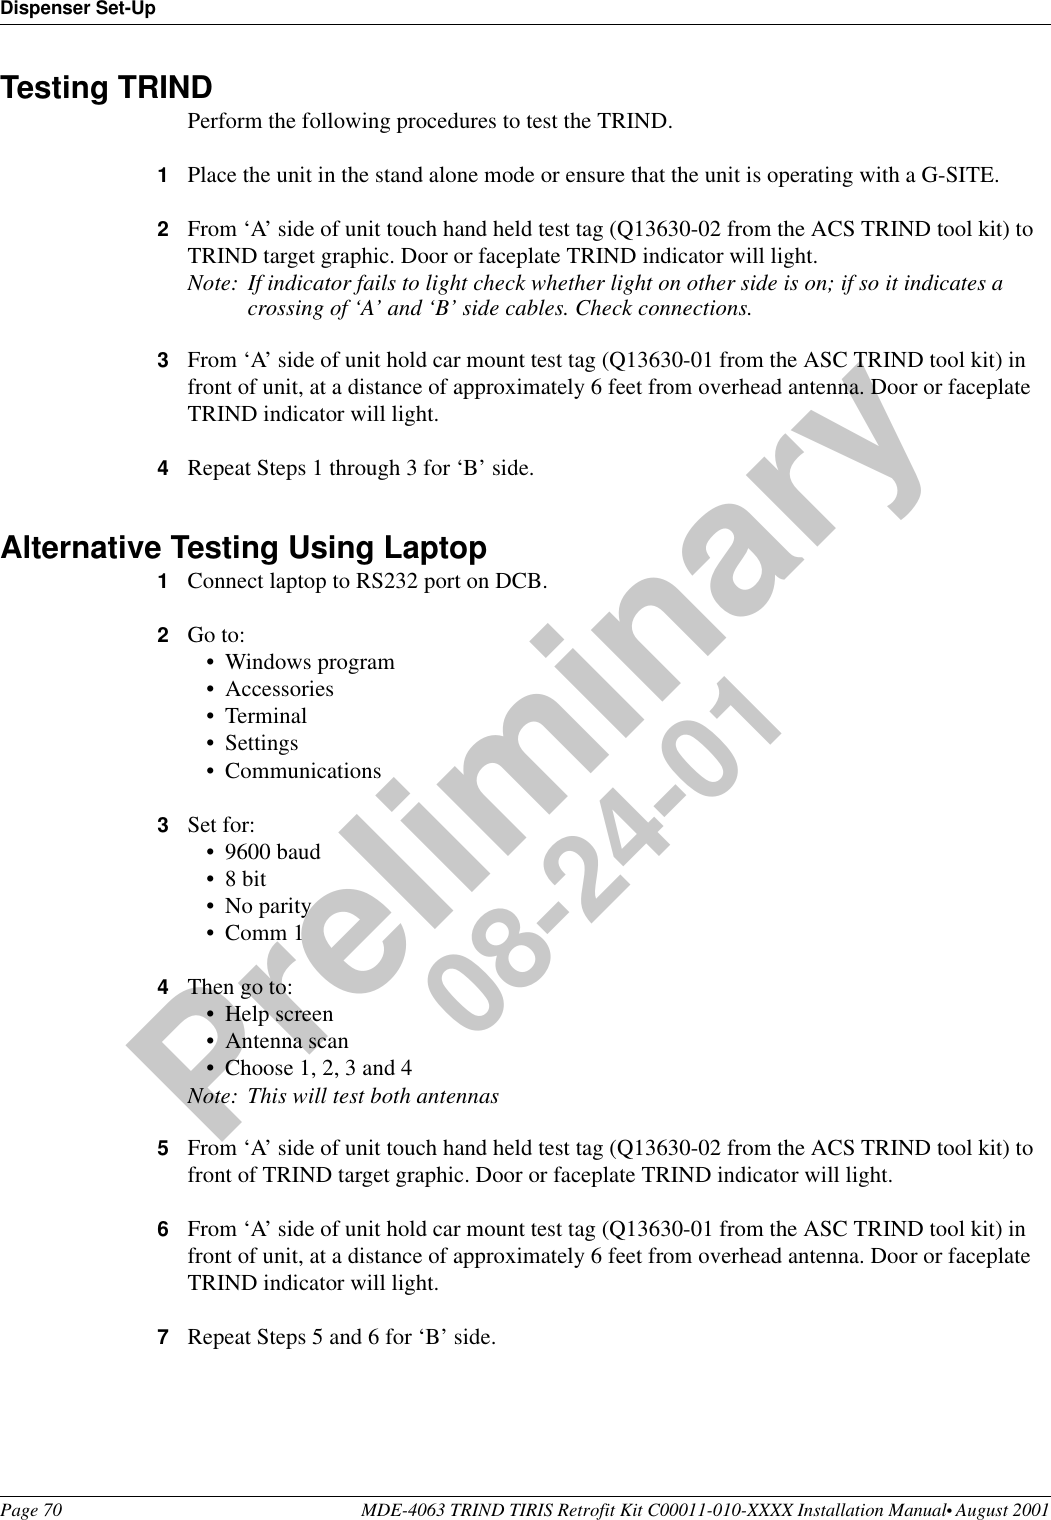 Dispenser Set-UpPage 70 MDE-4063 TRIND TIRIS Retrofit Kit C00011-010-XXXX Installation Manual• August 2001Preliminary08-24-01Testing TRINDPerform the following procedures to test the TRIND. 1Place the unit in the stand alone mode or ensure that the unit is operating with a G-SITE.2From ‘A’ side of unit touch hand held test tag (Q13630-02 from the ACS TRIND tool kit) to TRIND target graphic. Door or faceplate TRIND indicator will light.Note: If indicator fails to light check whether light on other side is on; if so it indicates a crossing of ‘A’ and ‘B’ side cables. Check connections.3From ‘A’ side of unit hold car mount test tag (Q13630-01 from the ASC TRIND tool kit) in front of unit, at a distance of approximately 6 feet from overhead antenna. Door or faceplate TRIND indicator will light.4Repeat Steps 1 through 3 for ‘B’ side.Alternative Testing Using Laptop1Connect laptop to RS232 port on DCB.2Go to:•Windows program•Accessories•Terminal•Settings•Communications3Set for:•9600 baud•8 bit•No parity•Comm 14Then go to:•Help screen•Antenna scan•Choose 1, 2, 3 and 4Note: This will test both antennas5From ‘A’ side of unit touch hand held test tag (Q13630-02 from the ACS TRIND tool kit) to front of TRIND target graphic. Door or faceplate TRIND indicator will light.6From ‘A’ side of unit hold car mount test tag (Q13630-01 from the ASC TRIND tool kit) in front of unit, at a distance of approximately 6 feet from overhead antenna. Door or faceplate TRIND indicator will light.7Repeat Steps 5 and 6 for ‘B’ side.